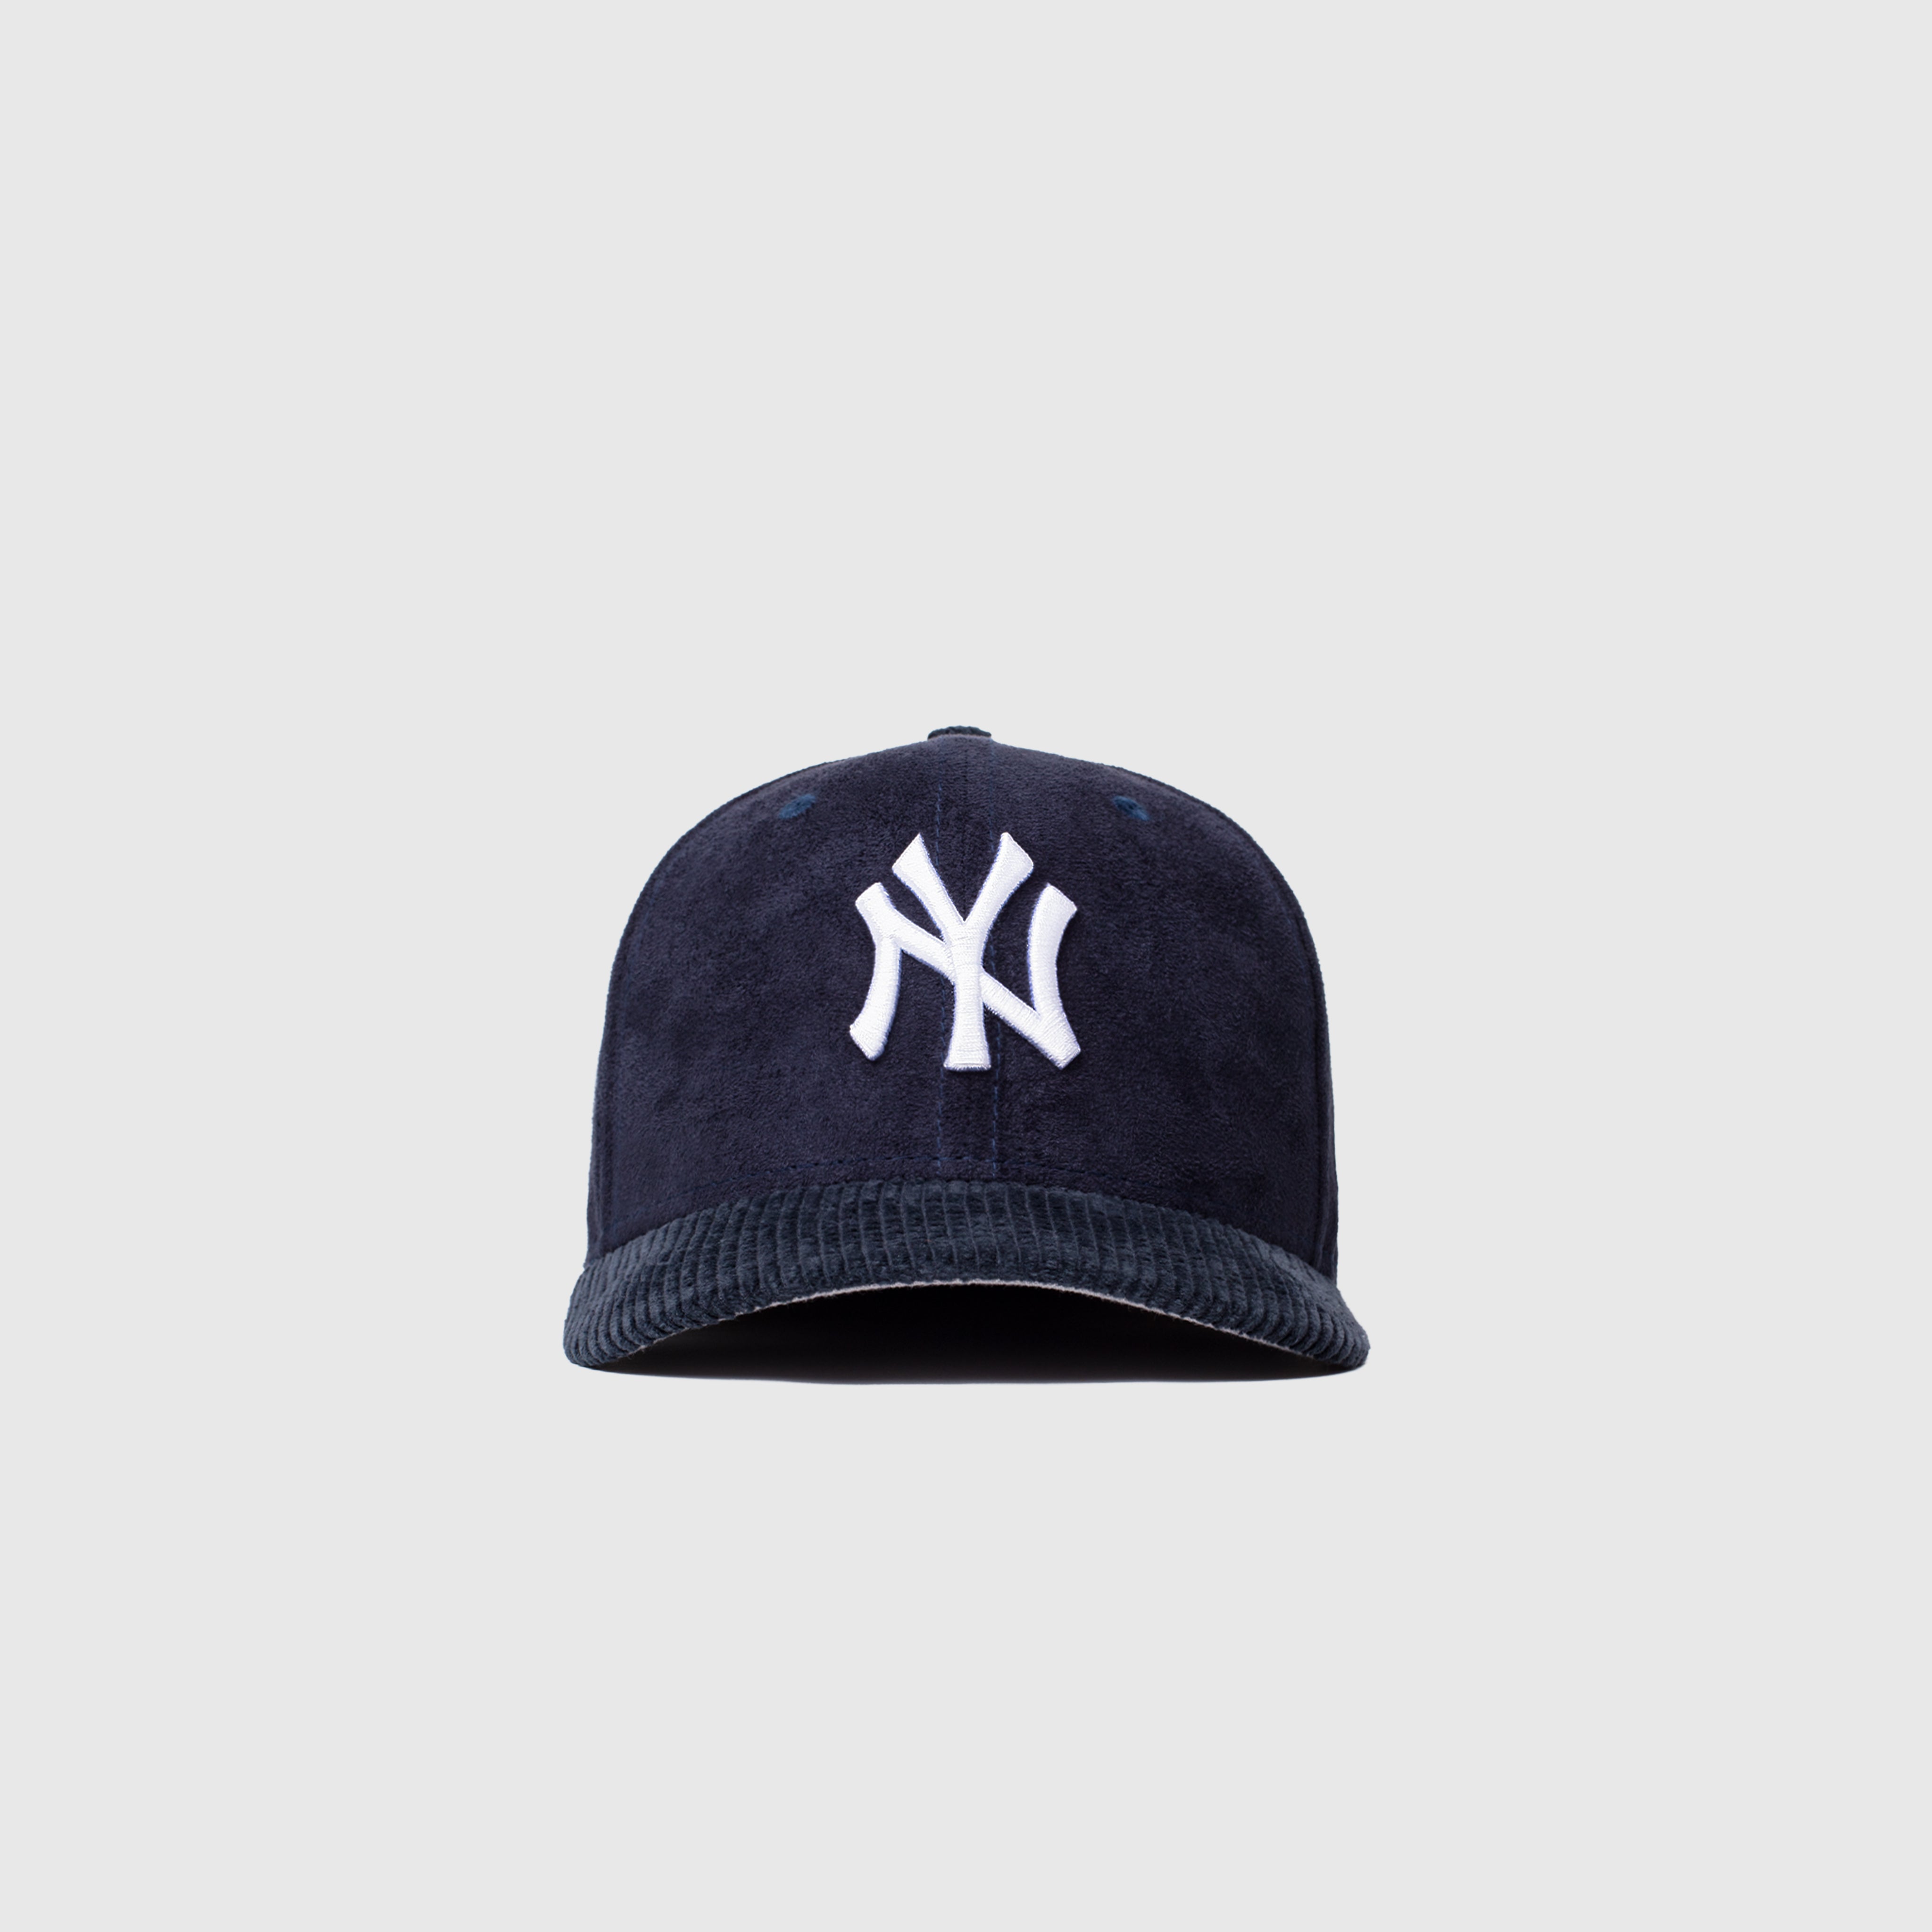 PACKER X NEW ERA NEW YORK YANKEES 59FIFTY FITTED "MIXED MATERIALS"